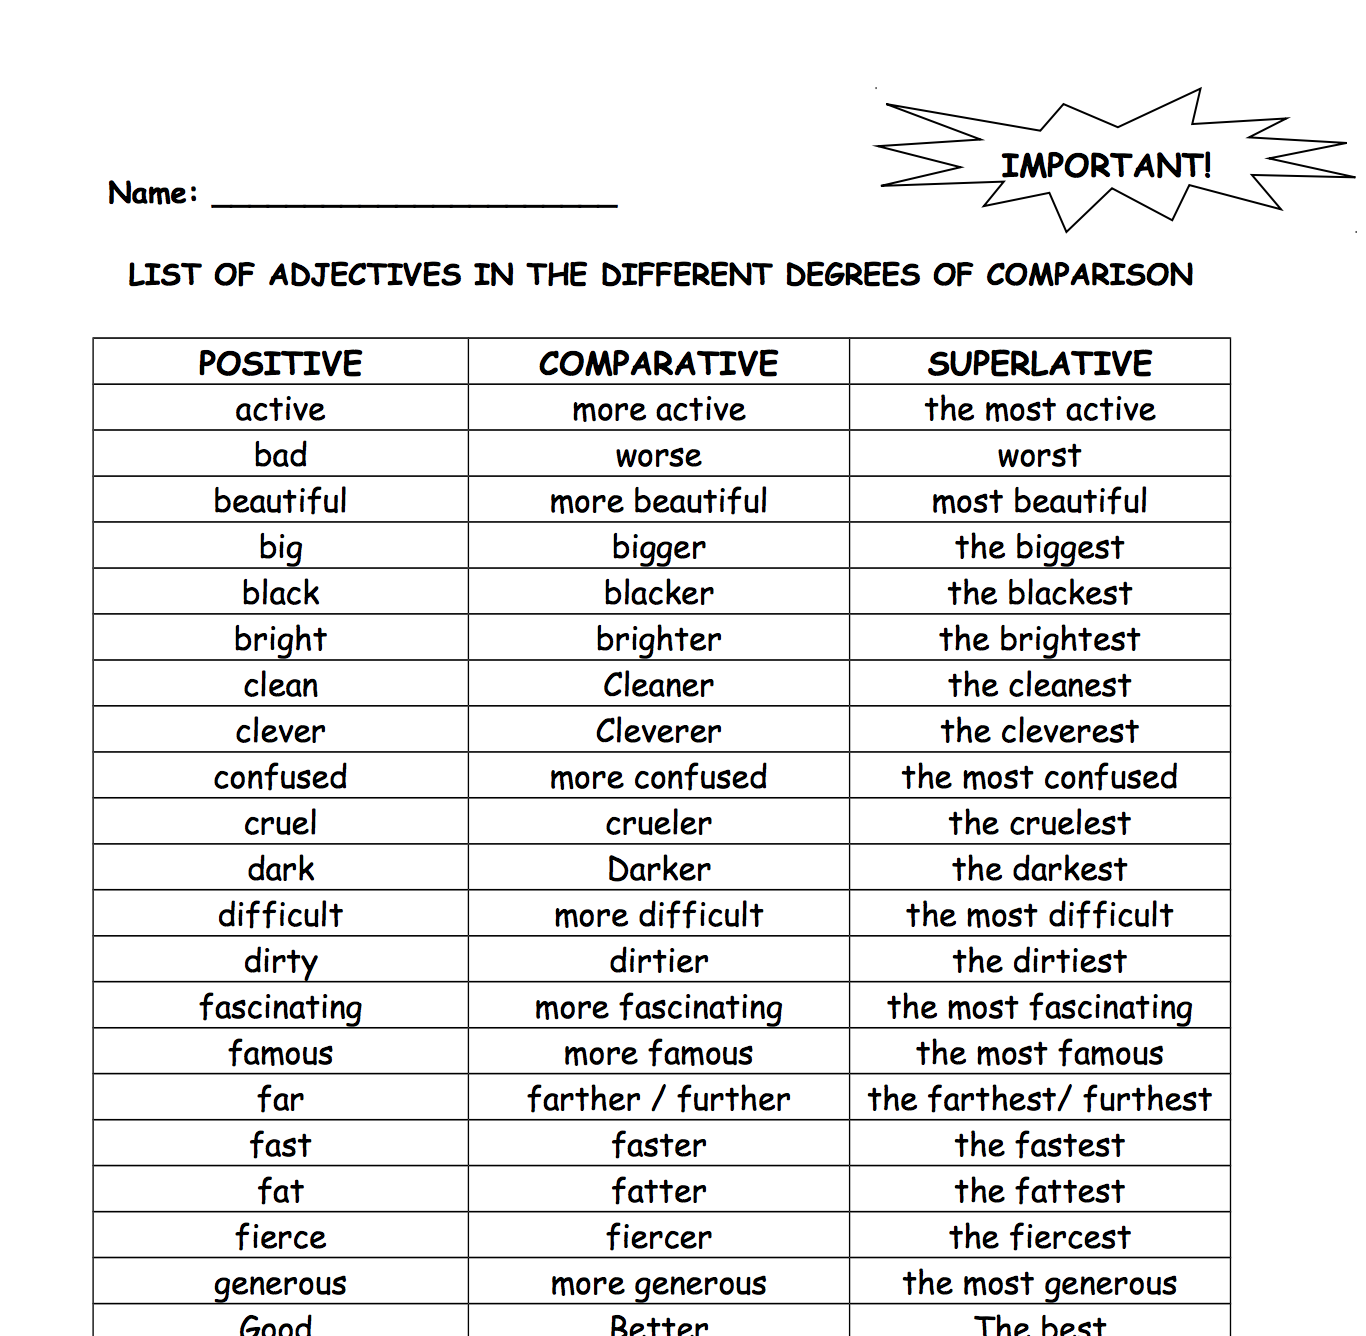 comparison-of-adjectives-arsimi-gjitheperfshires